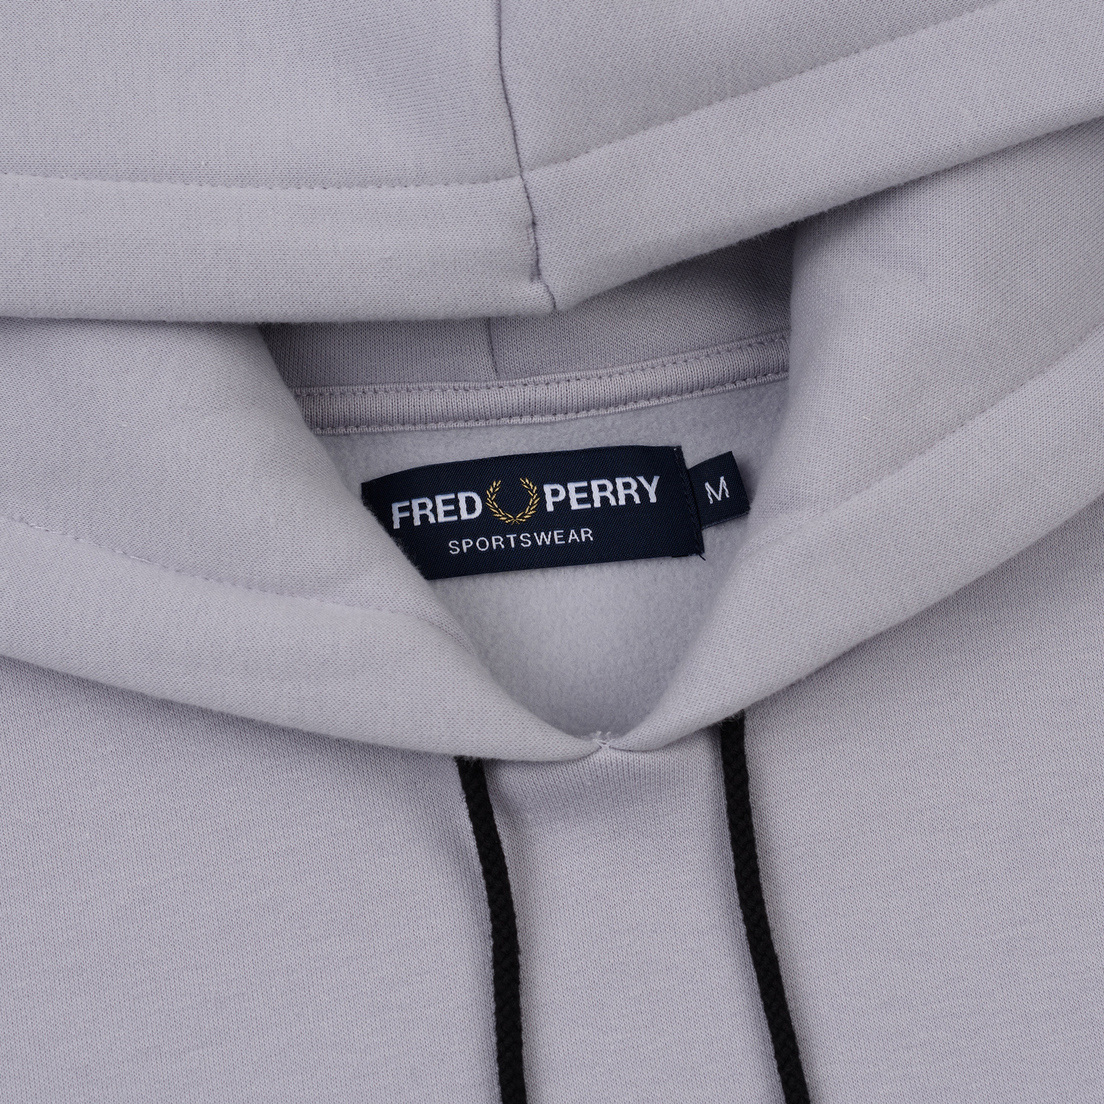 Fred Perry Мужская толстовка Embroidered Hooded